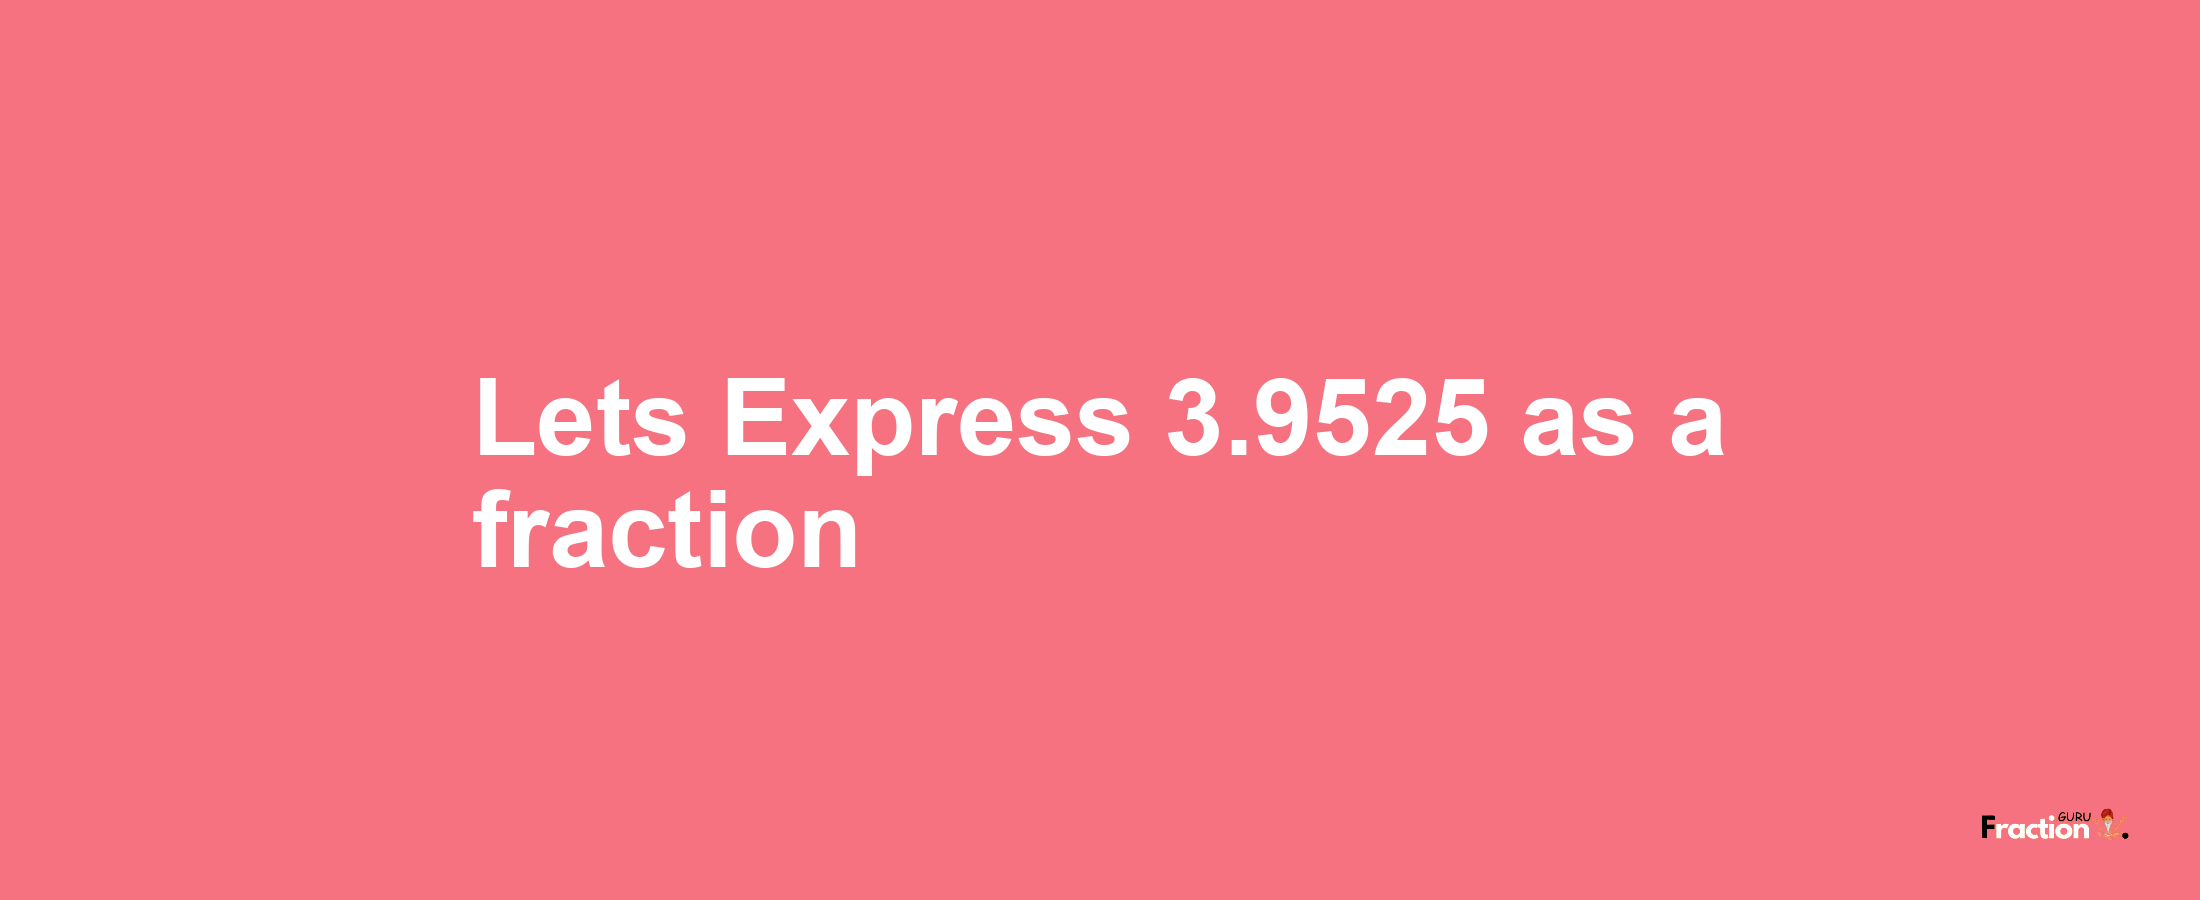 Lets Express 3.9525 as afraction